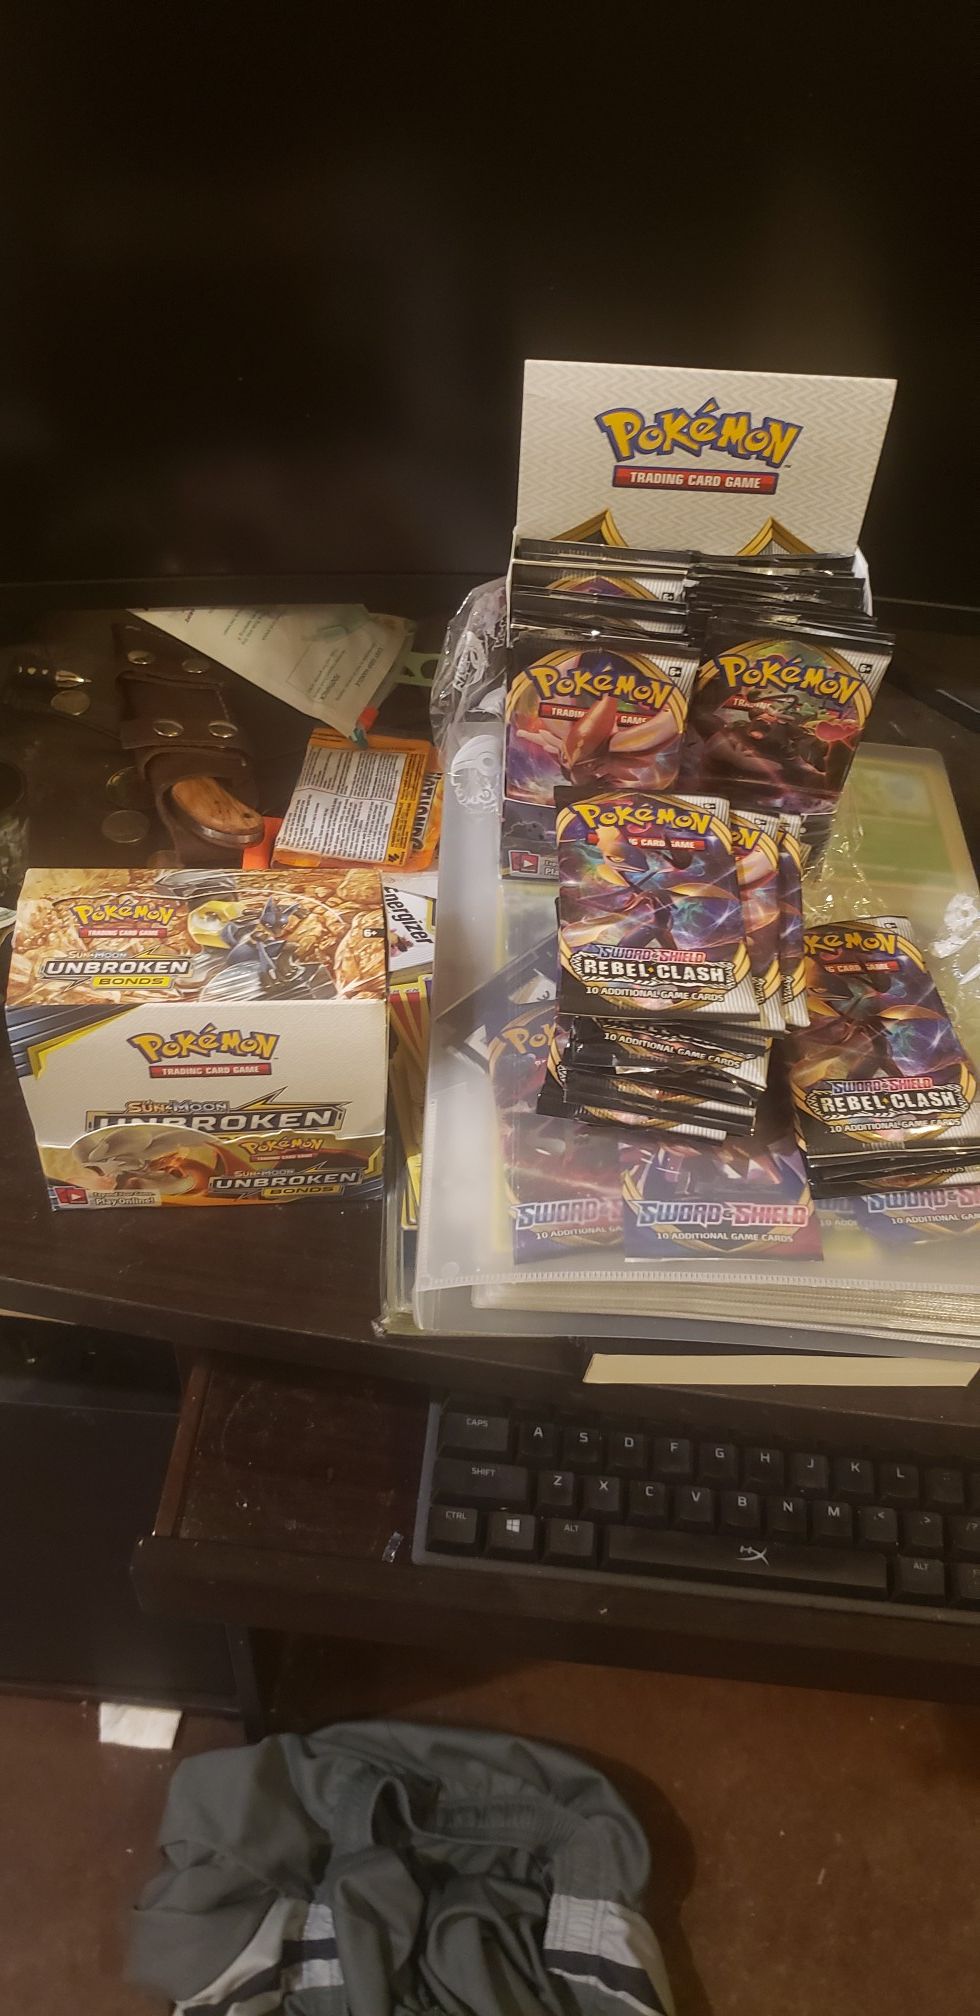 Pokemon cards for sale - mostly Sword & Shield and Rebel Clash